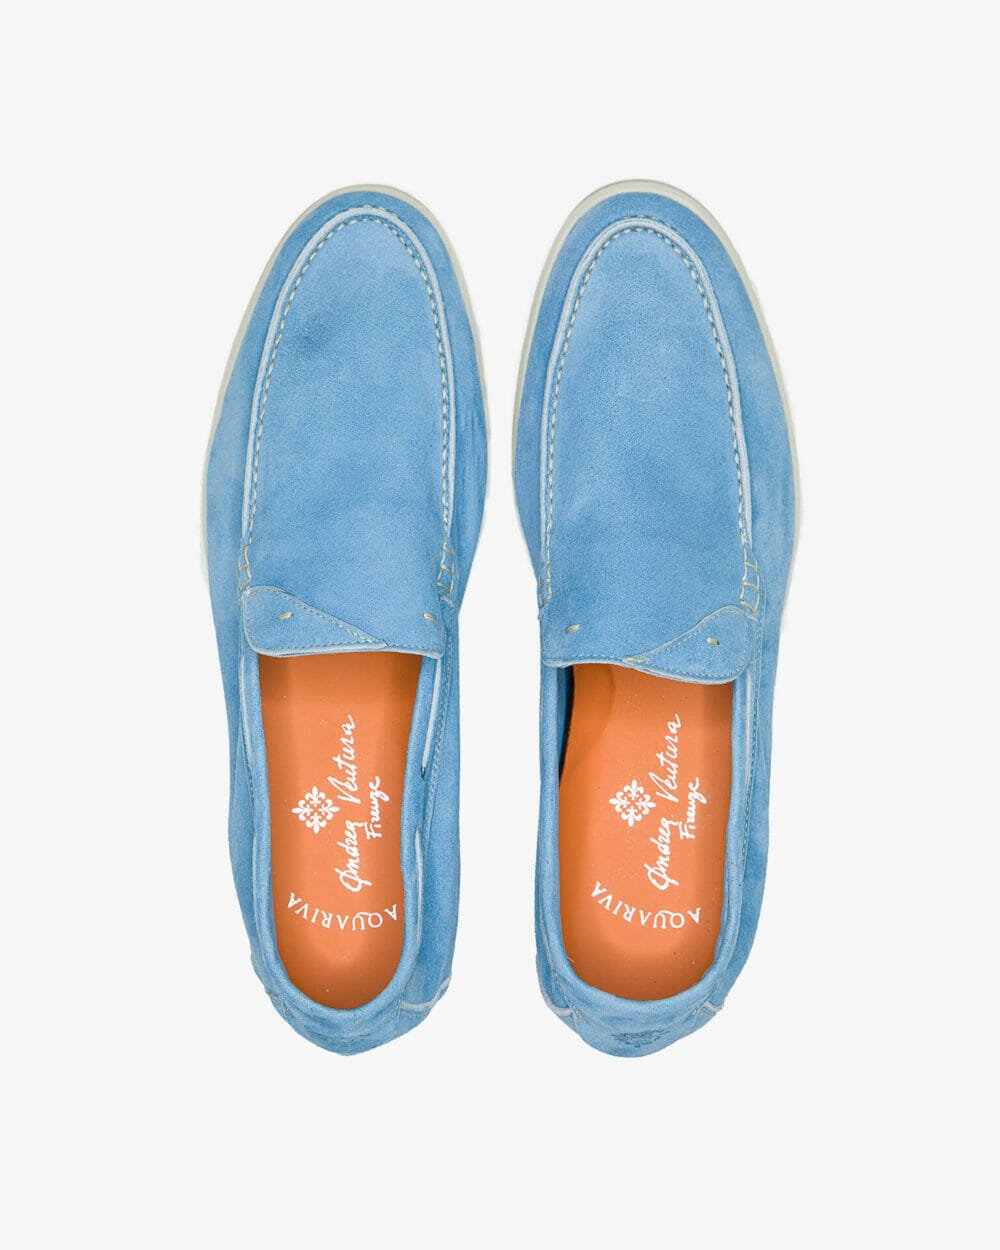 Aquariva-Iseo-azur-suede-from-above